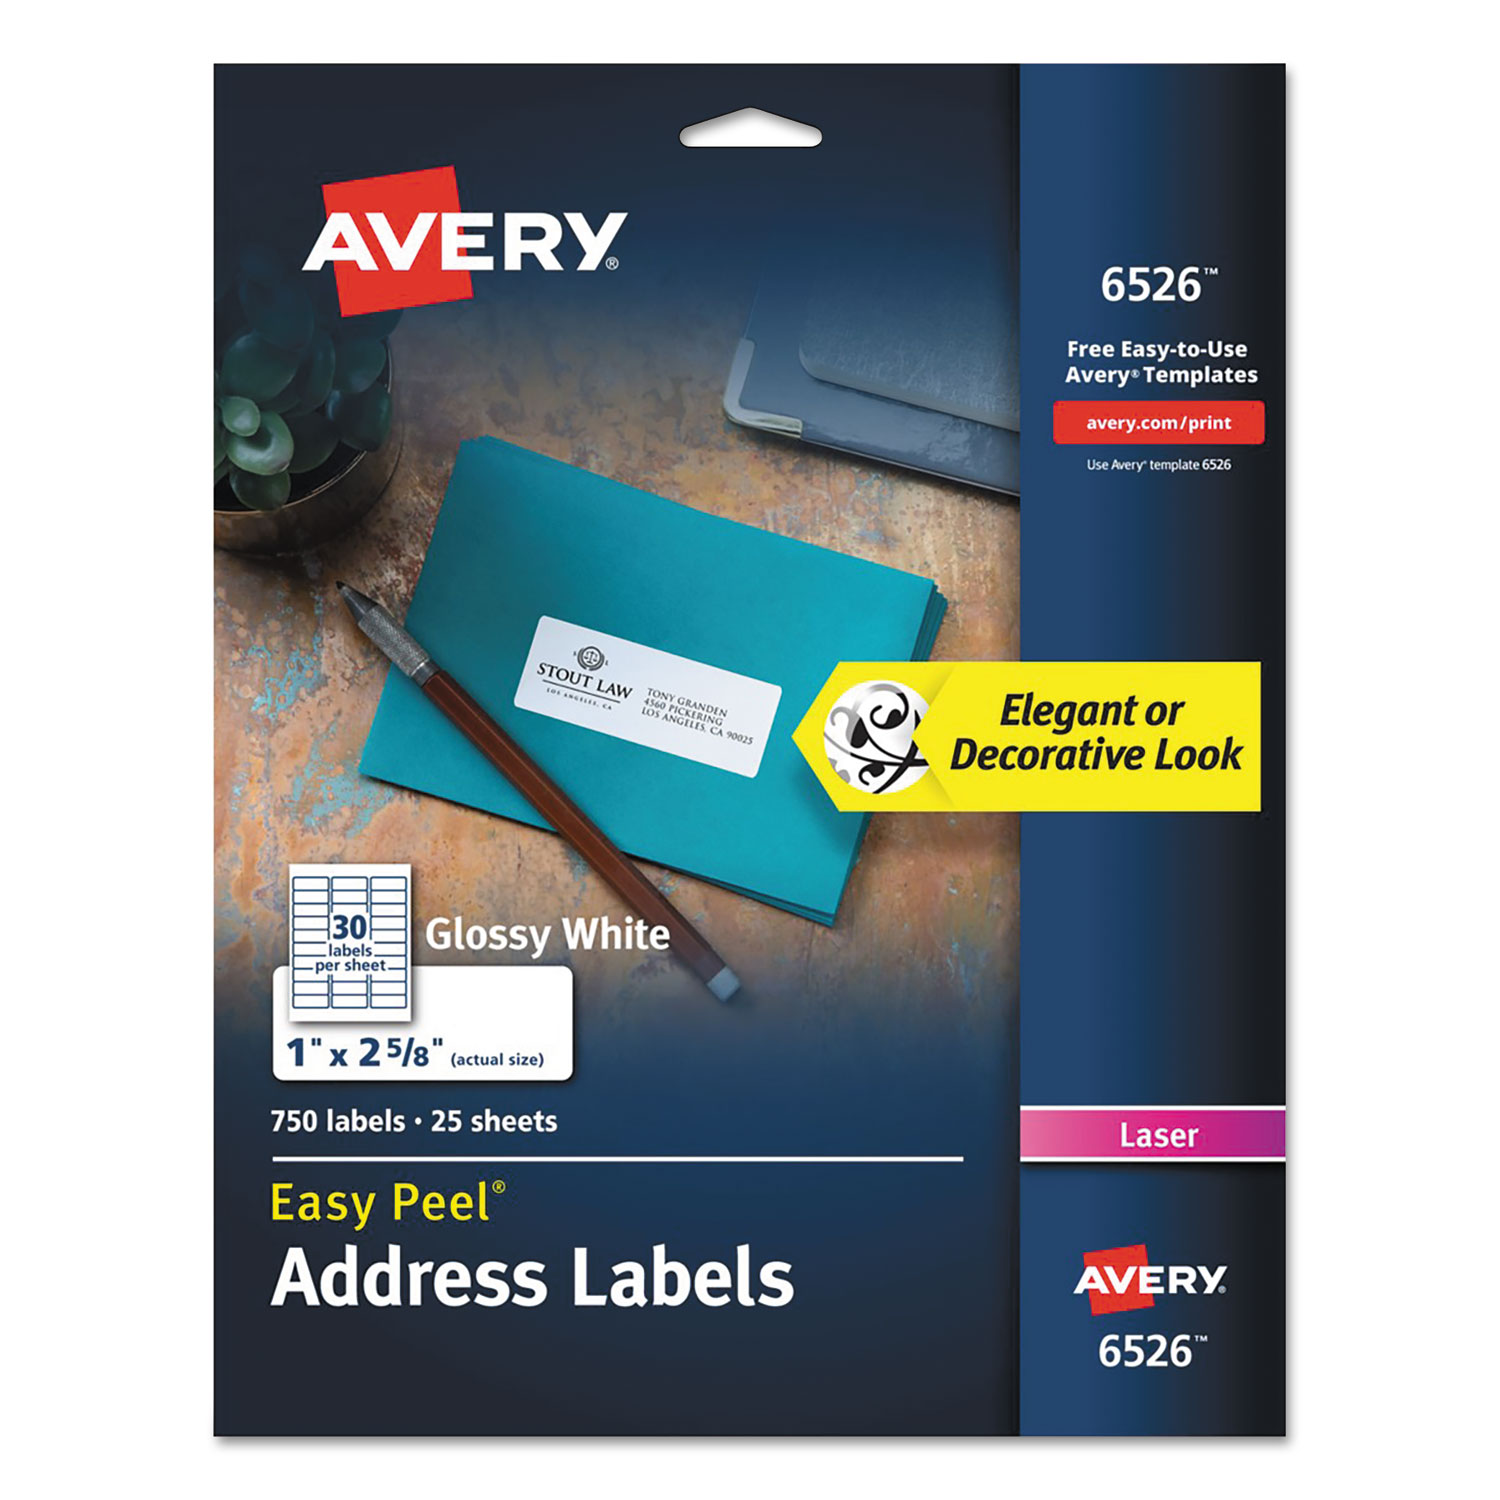  Avery 06526 Glossy White Easy Peel Mailing Labels w/ Sure Feed Technology, Laser Printers, 1 x 2.63, White, 30/Sheet, 25 Sheets/Pack (AVE6526) 